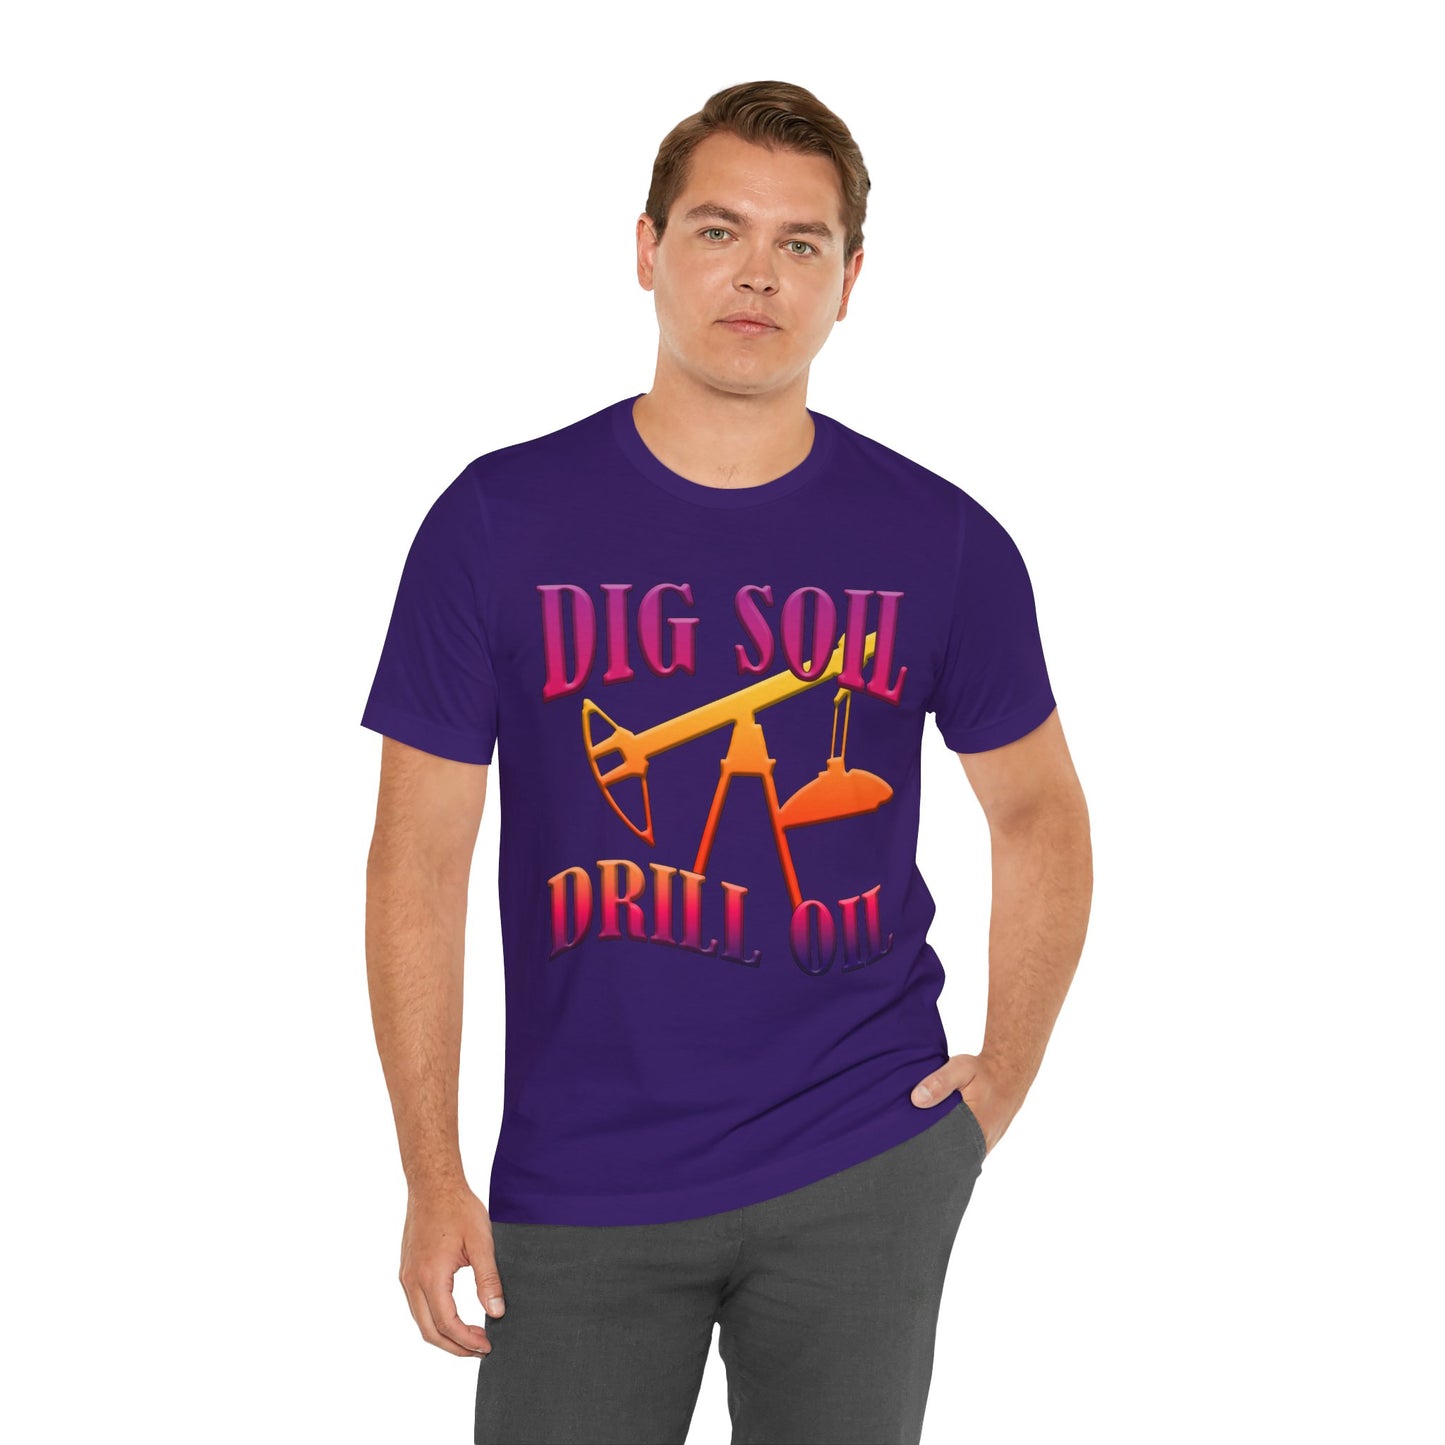 Dig Soil Drill Oil Funny American Tee